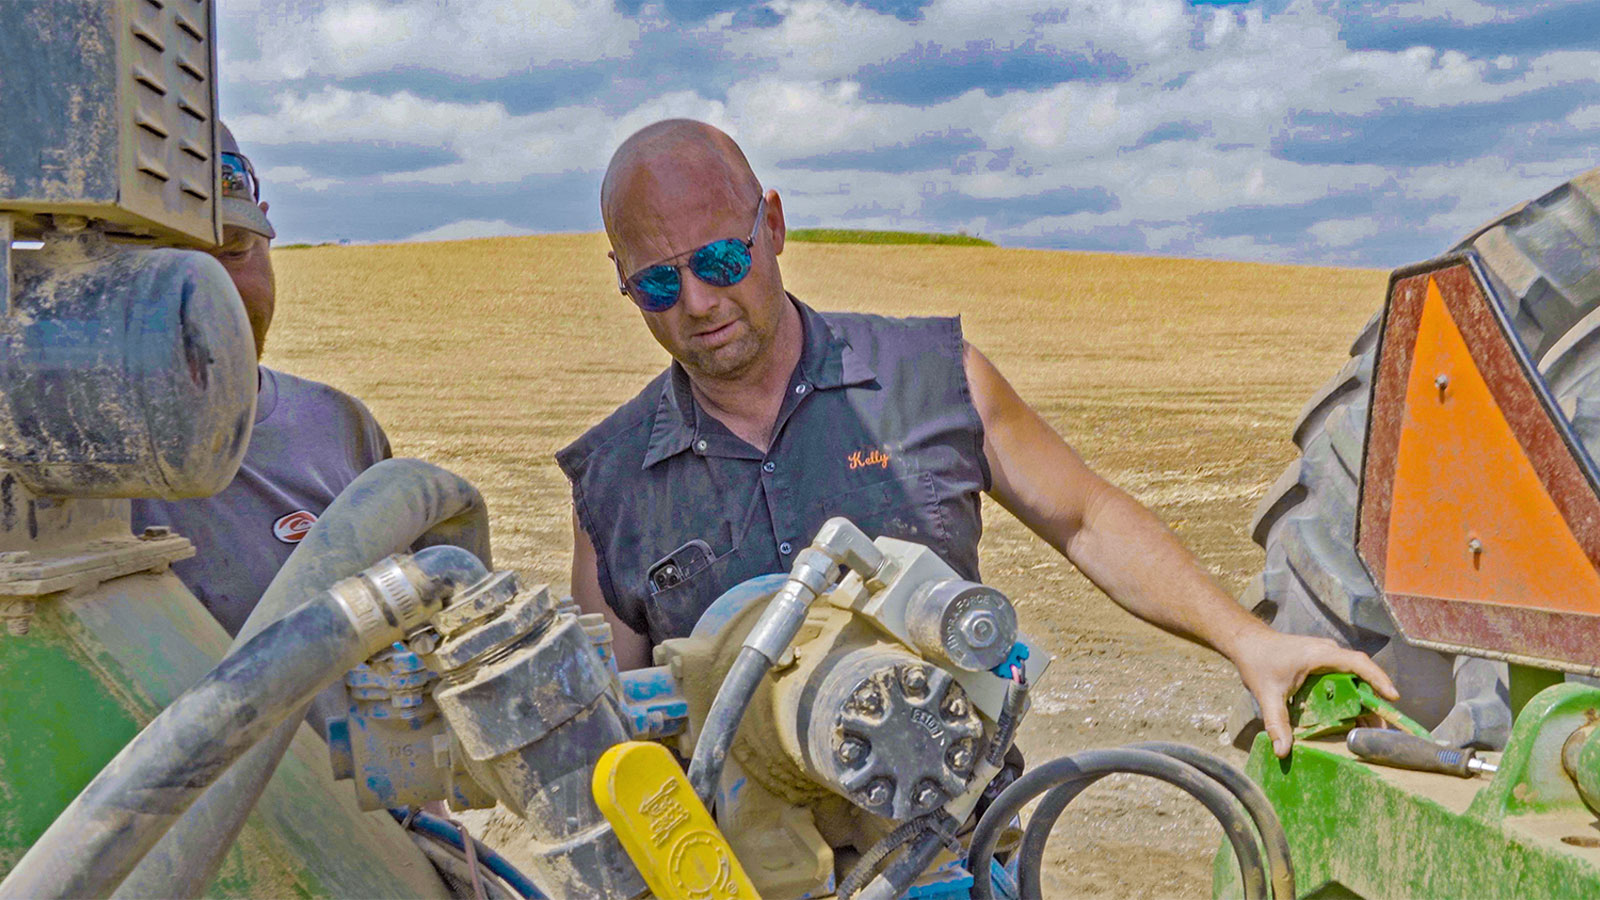 A bald man in sunglasses and a cut-off shirt looks over a piece of farm equipment